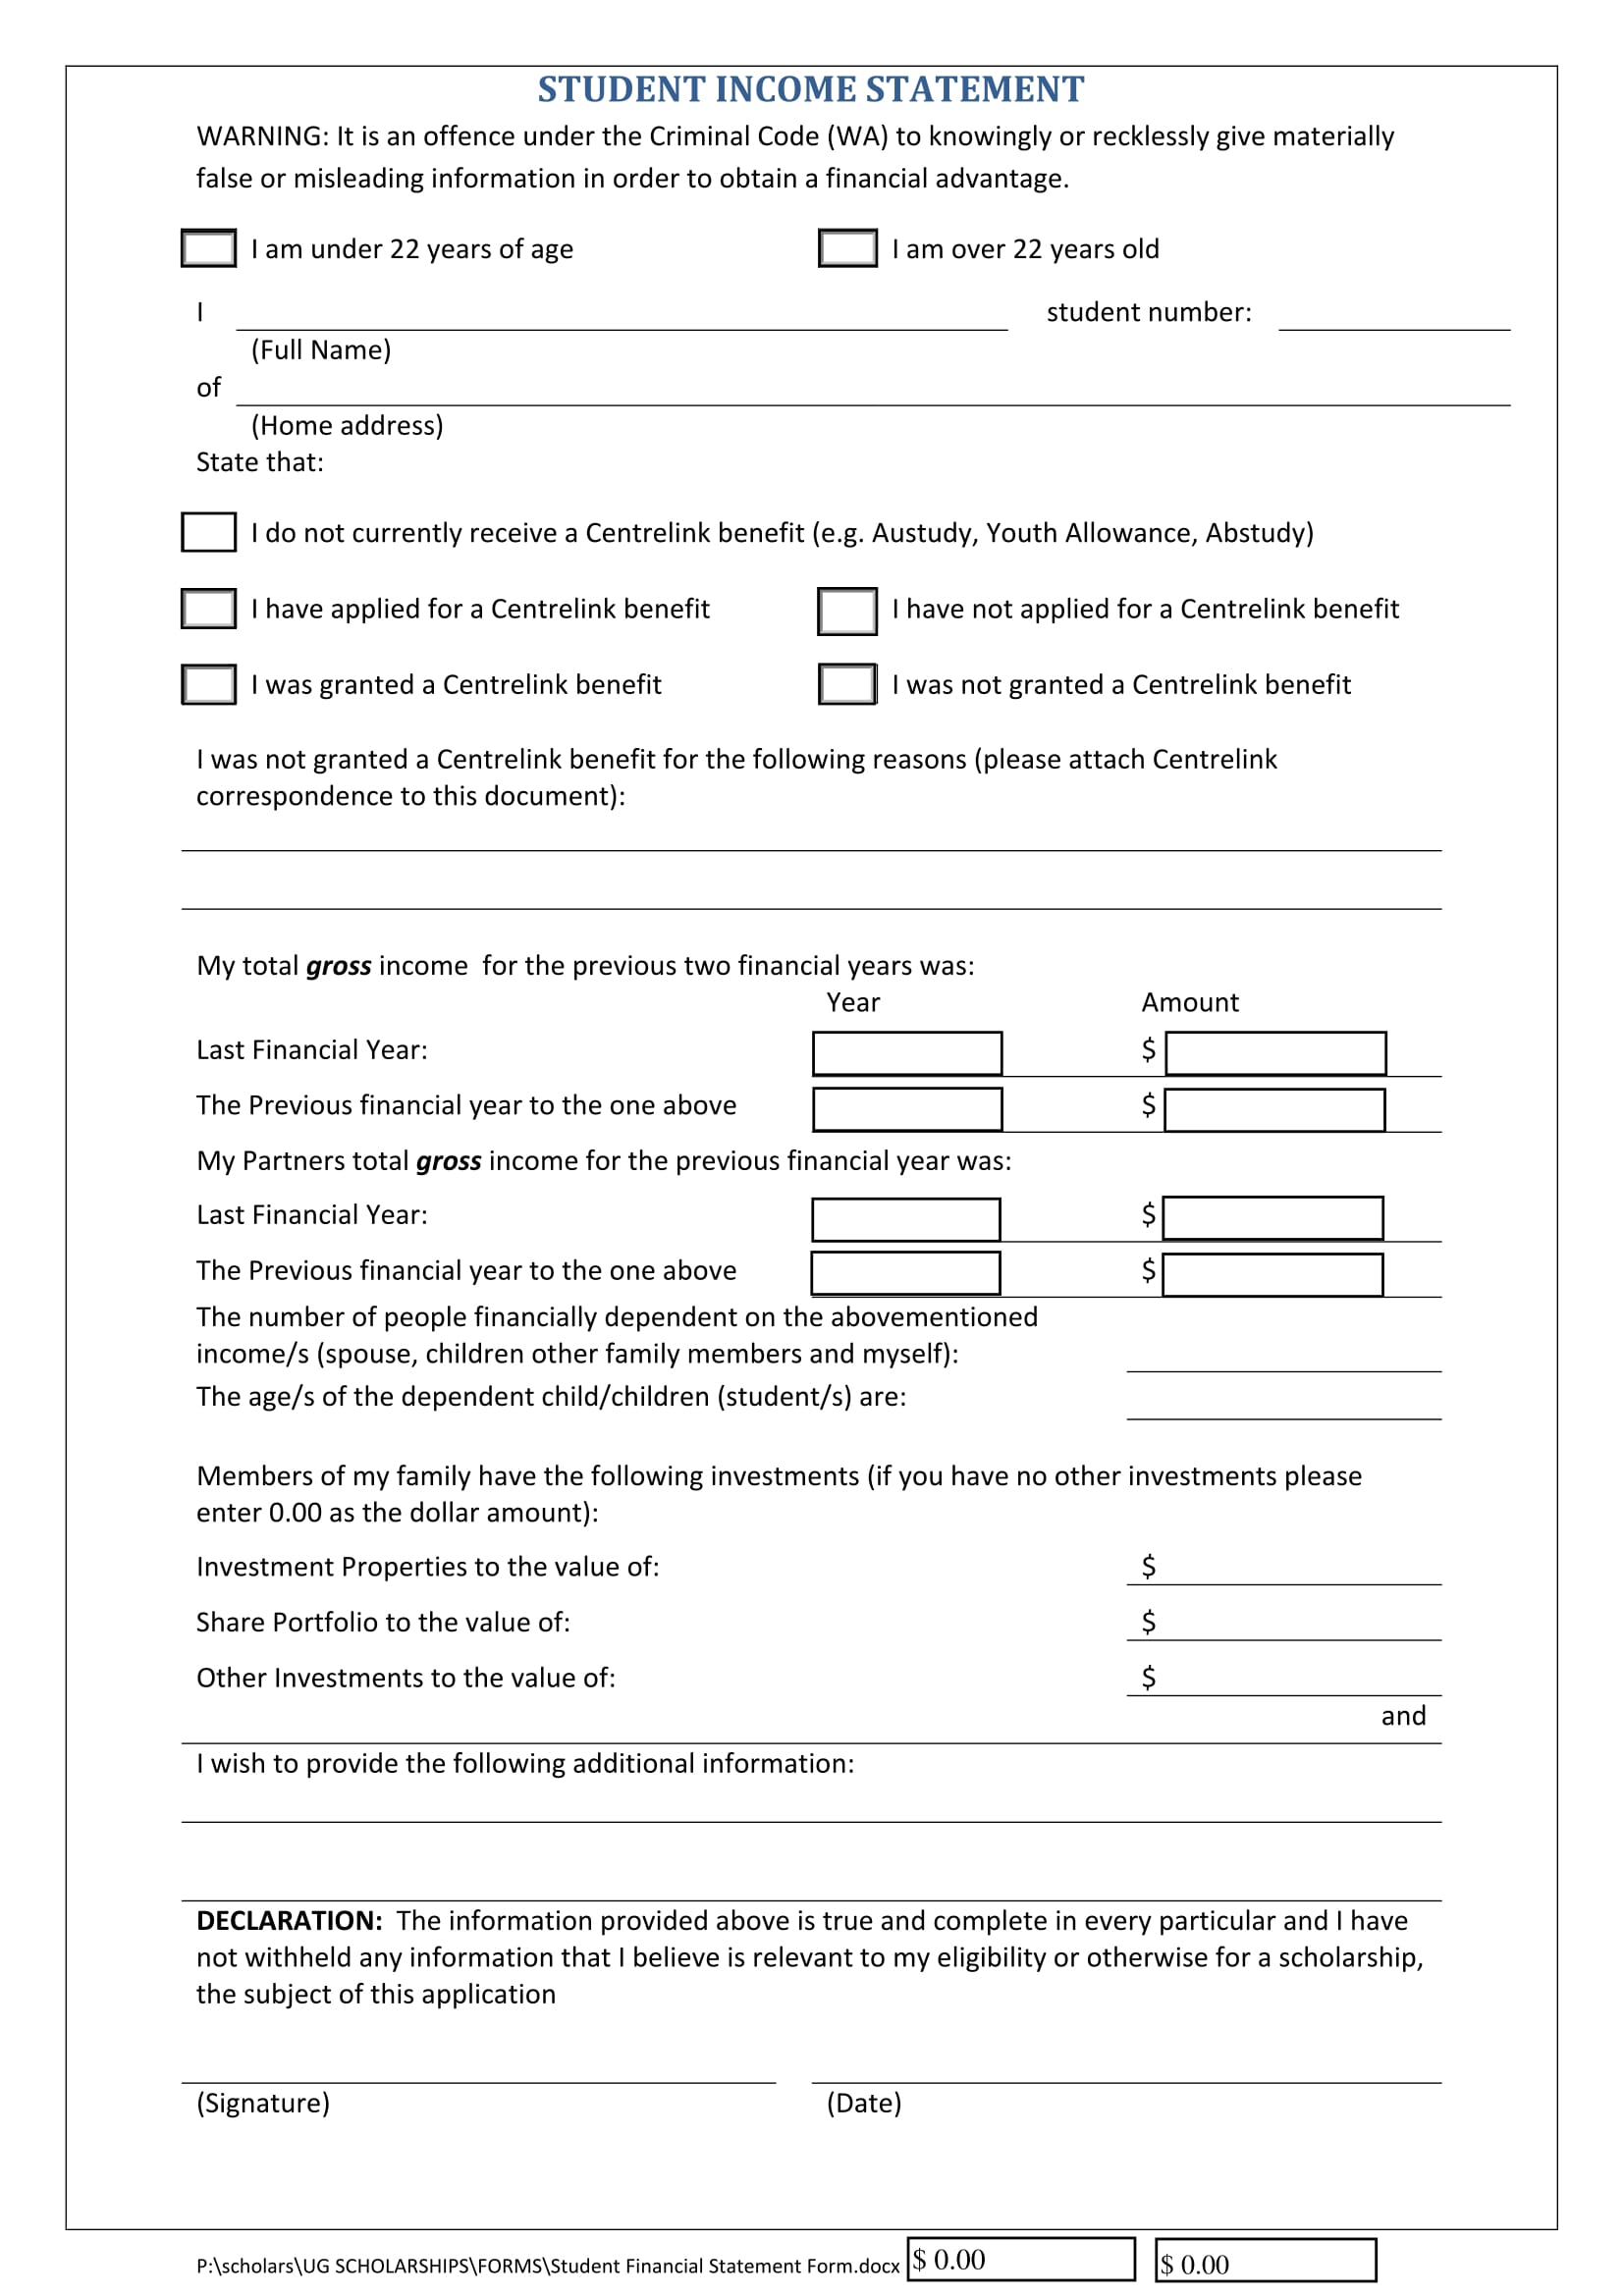 student income statement form 1